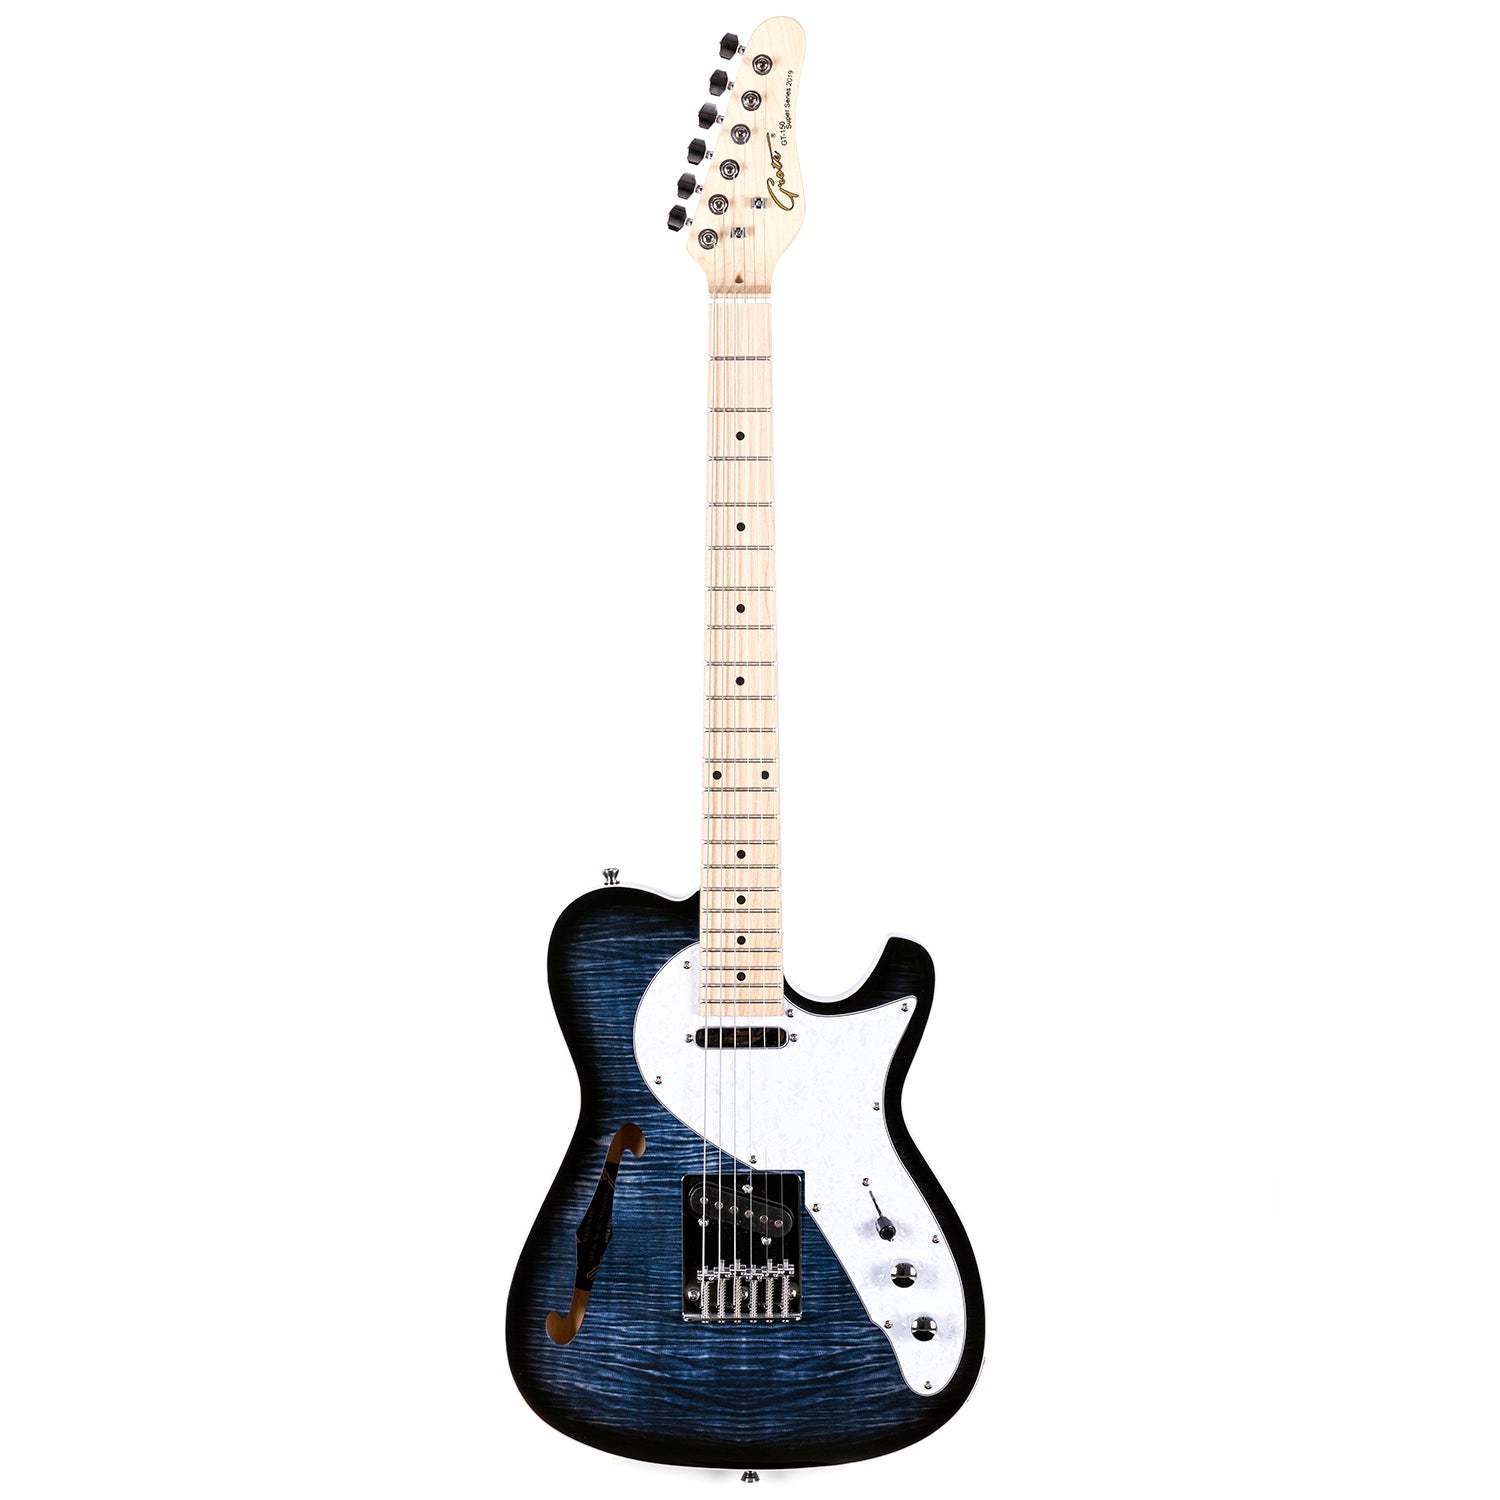 Vær modløs foretrækkes Abe Grote Electric Guitar Semi-Hollow Body Single F-Hole Tele Style Guitar –  Grote Guitar